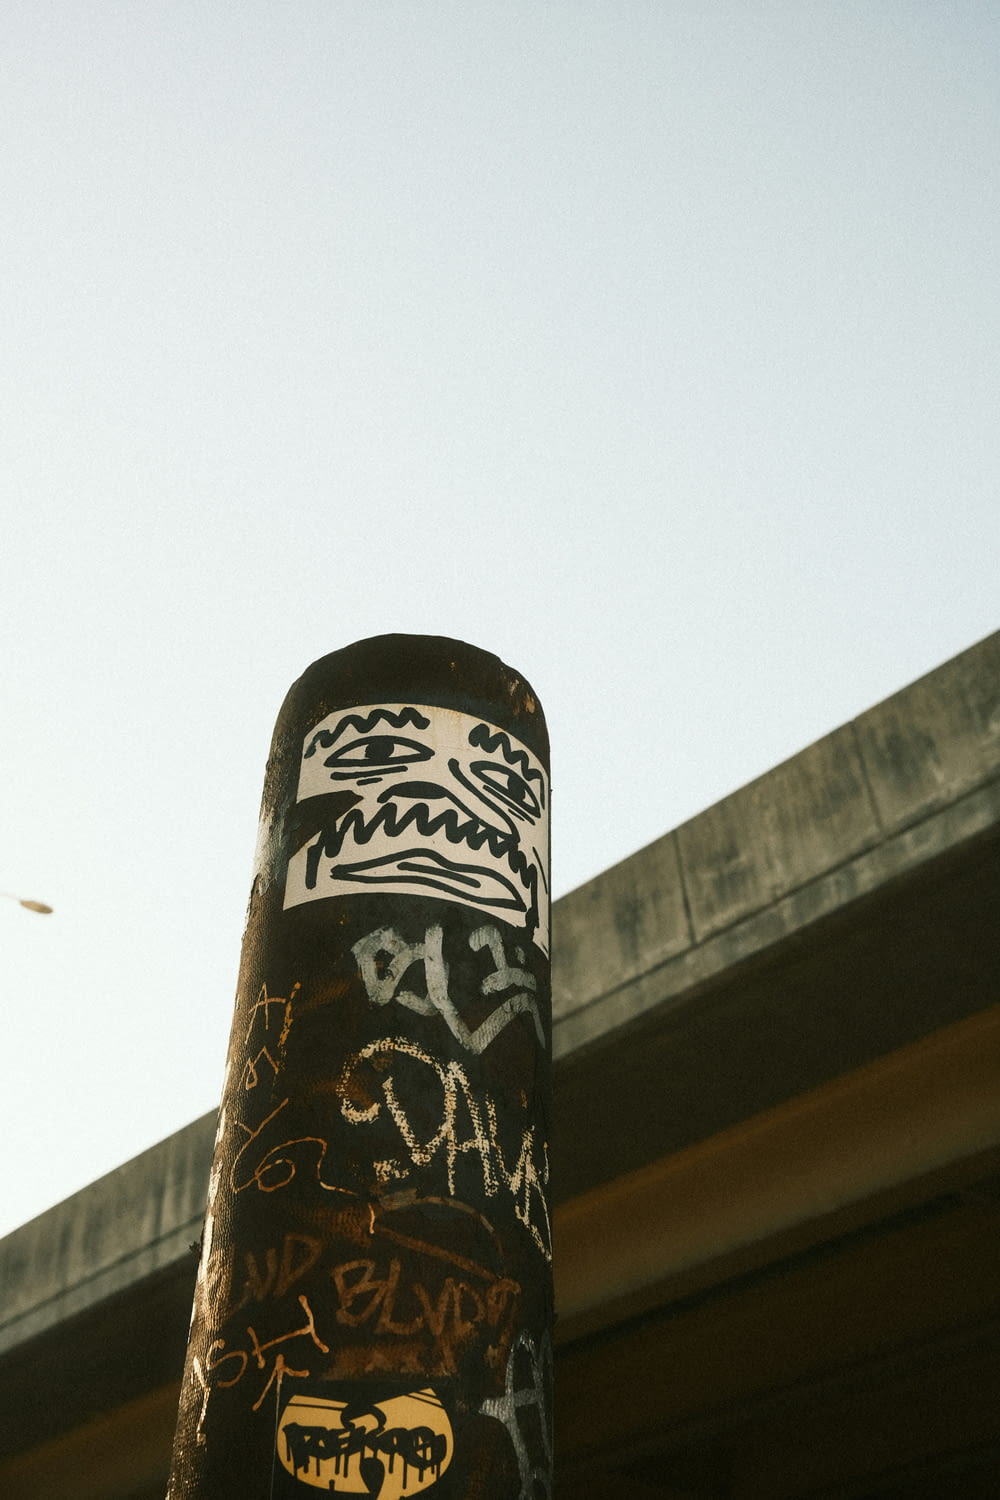 a close up of a pole with graffiti on it